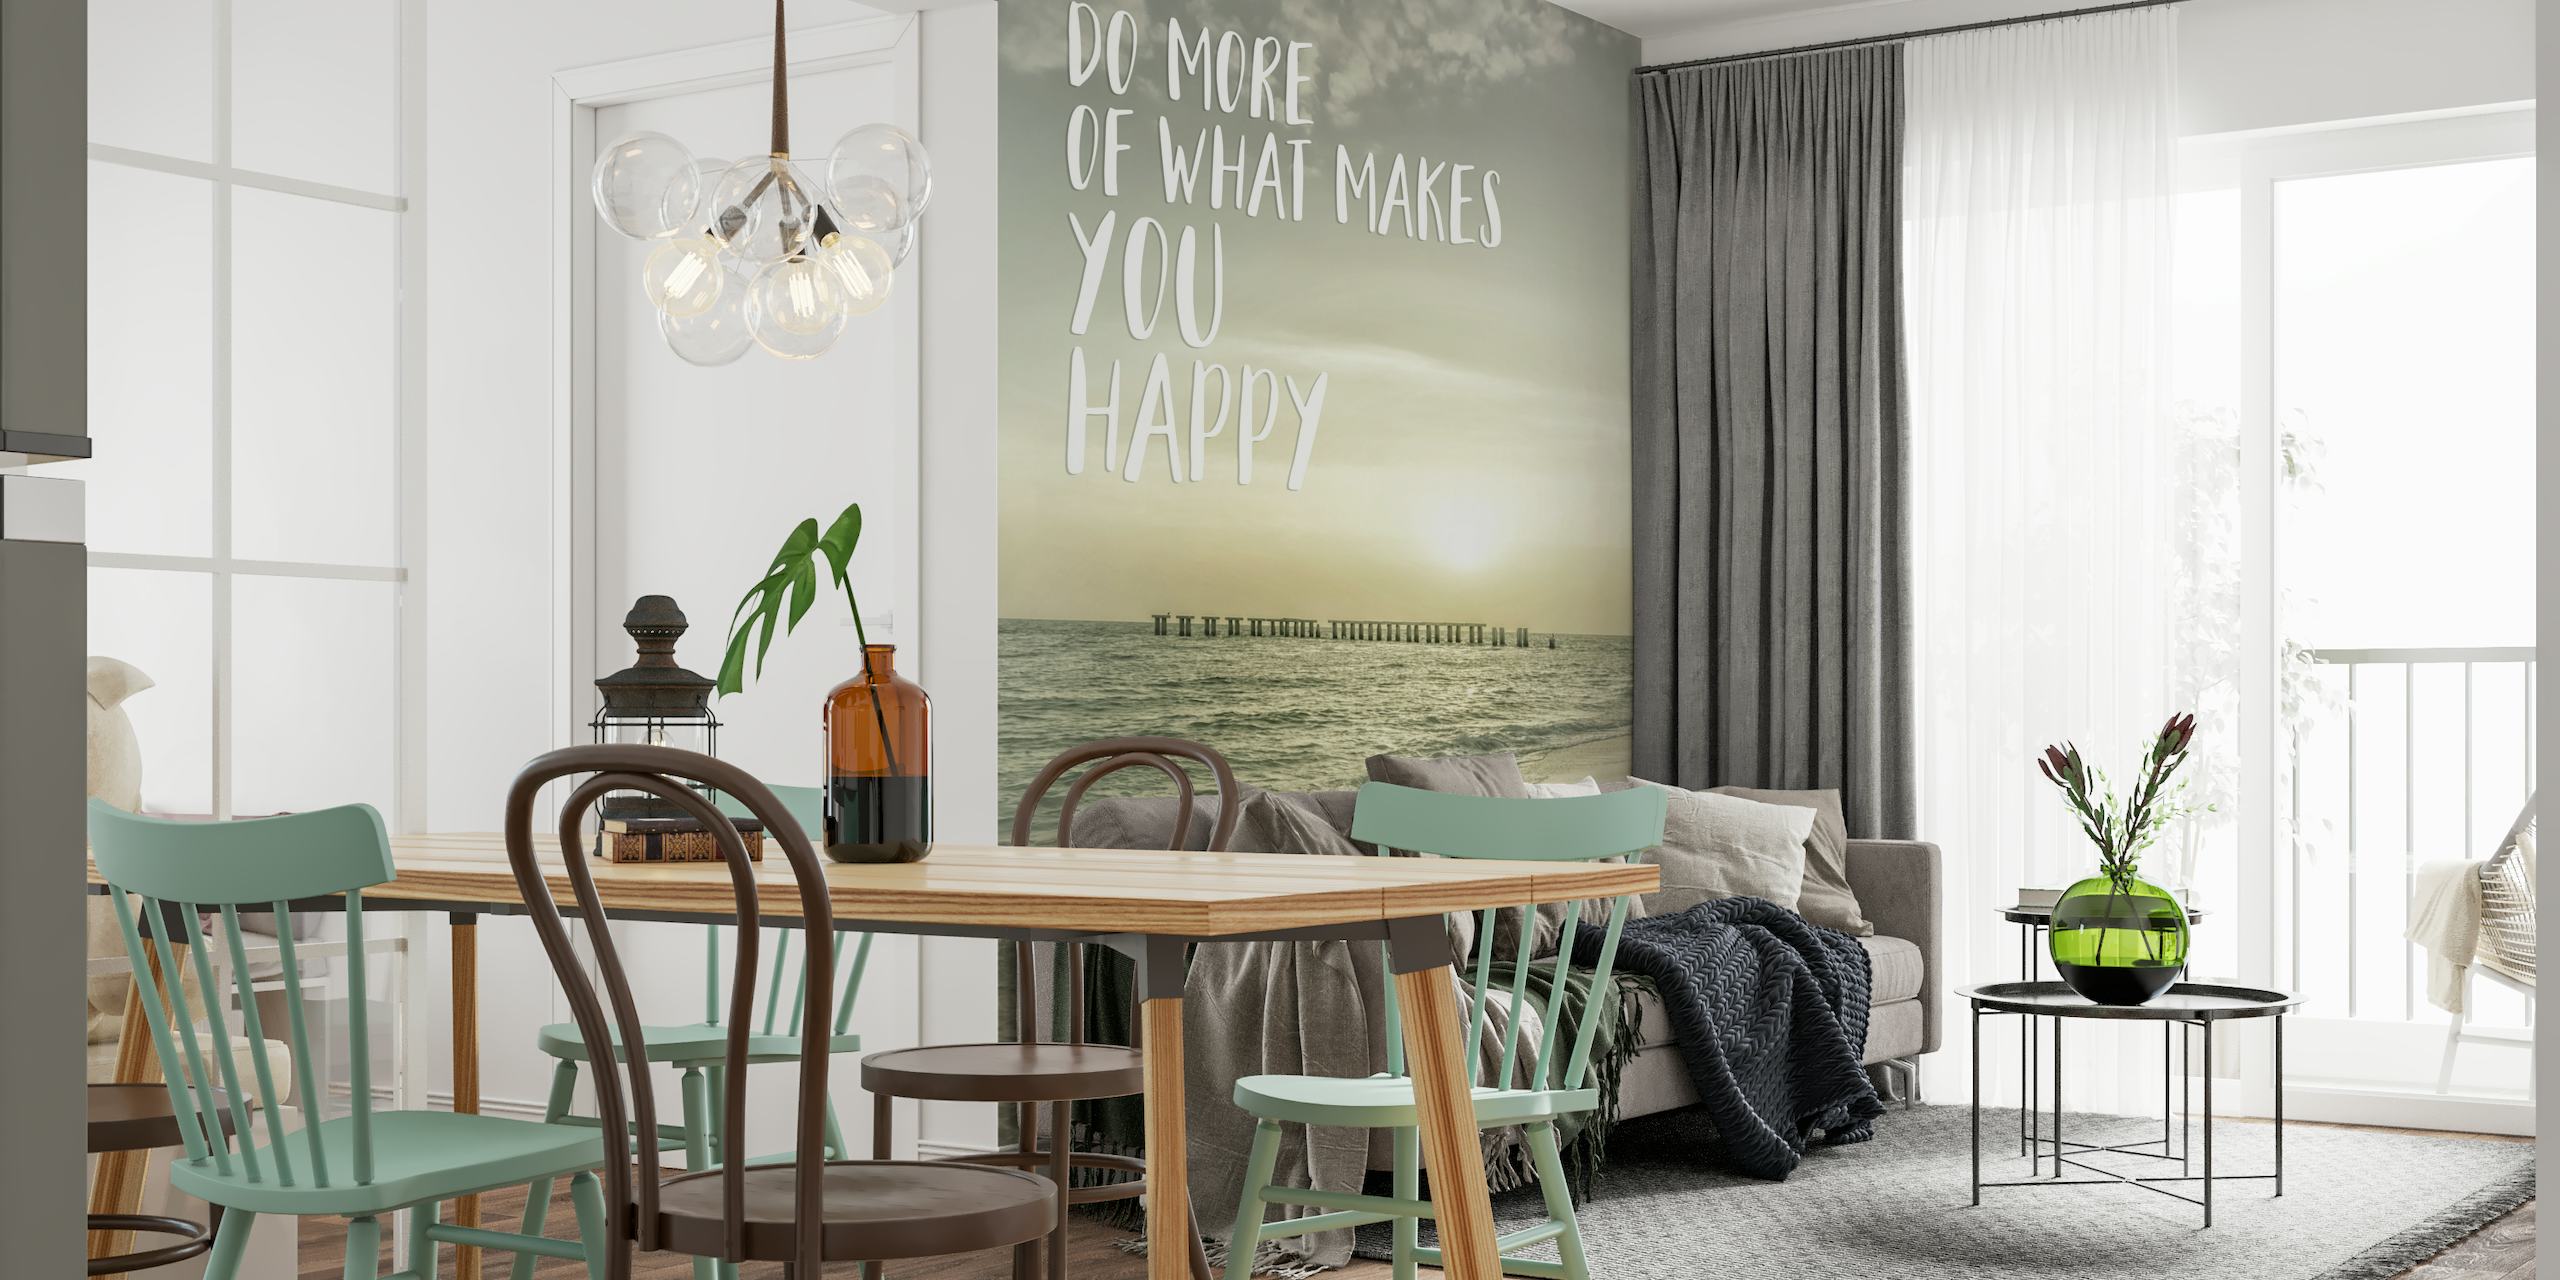 Do more of what makes you happy | Sunset ταπετσαρία